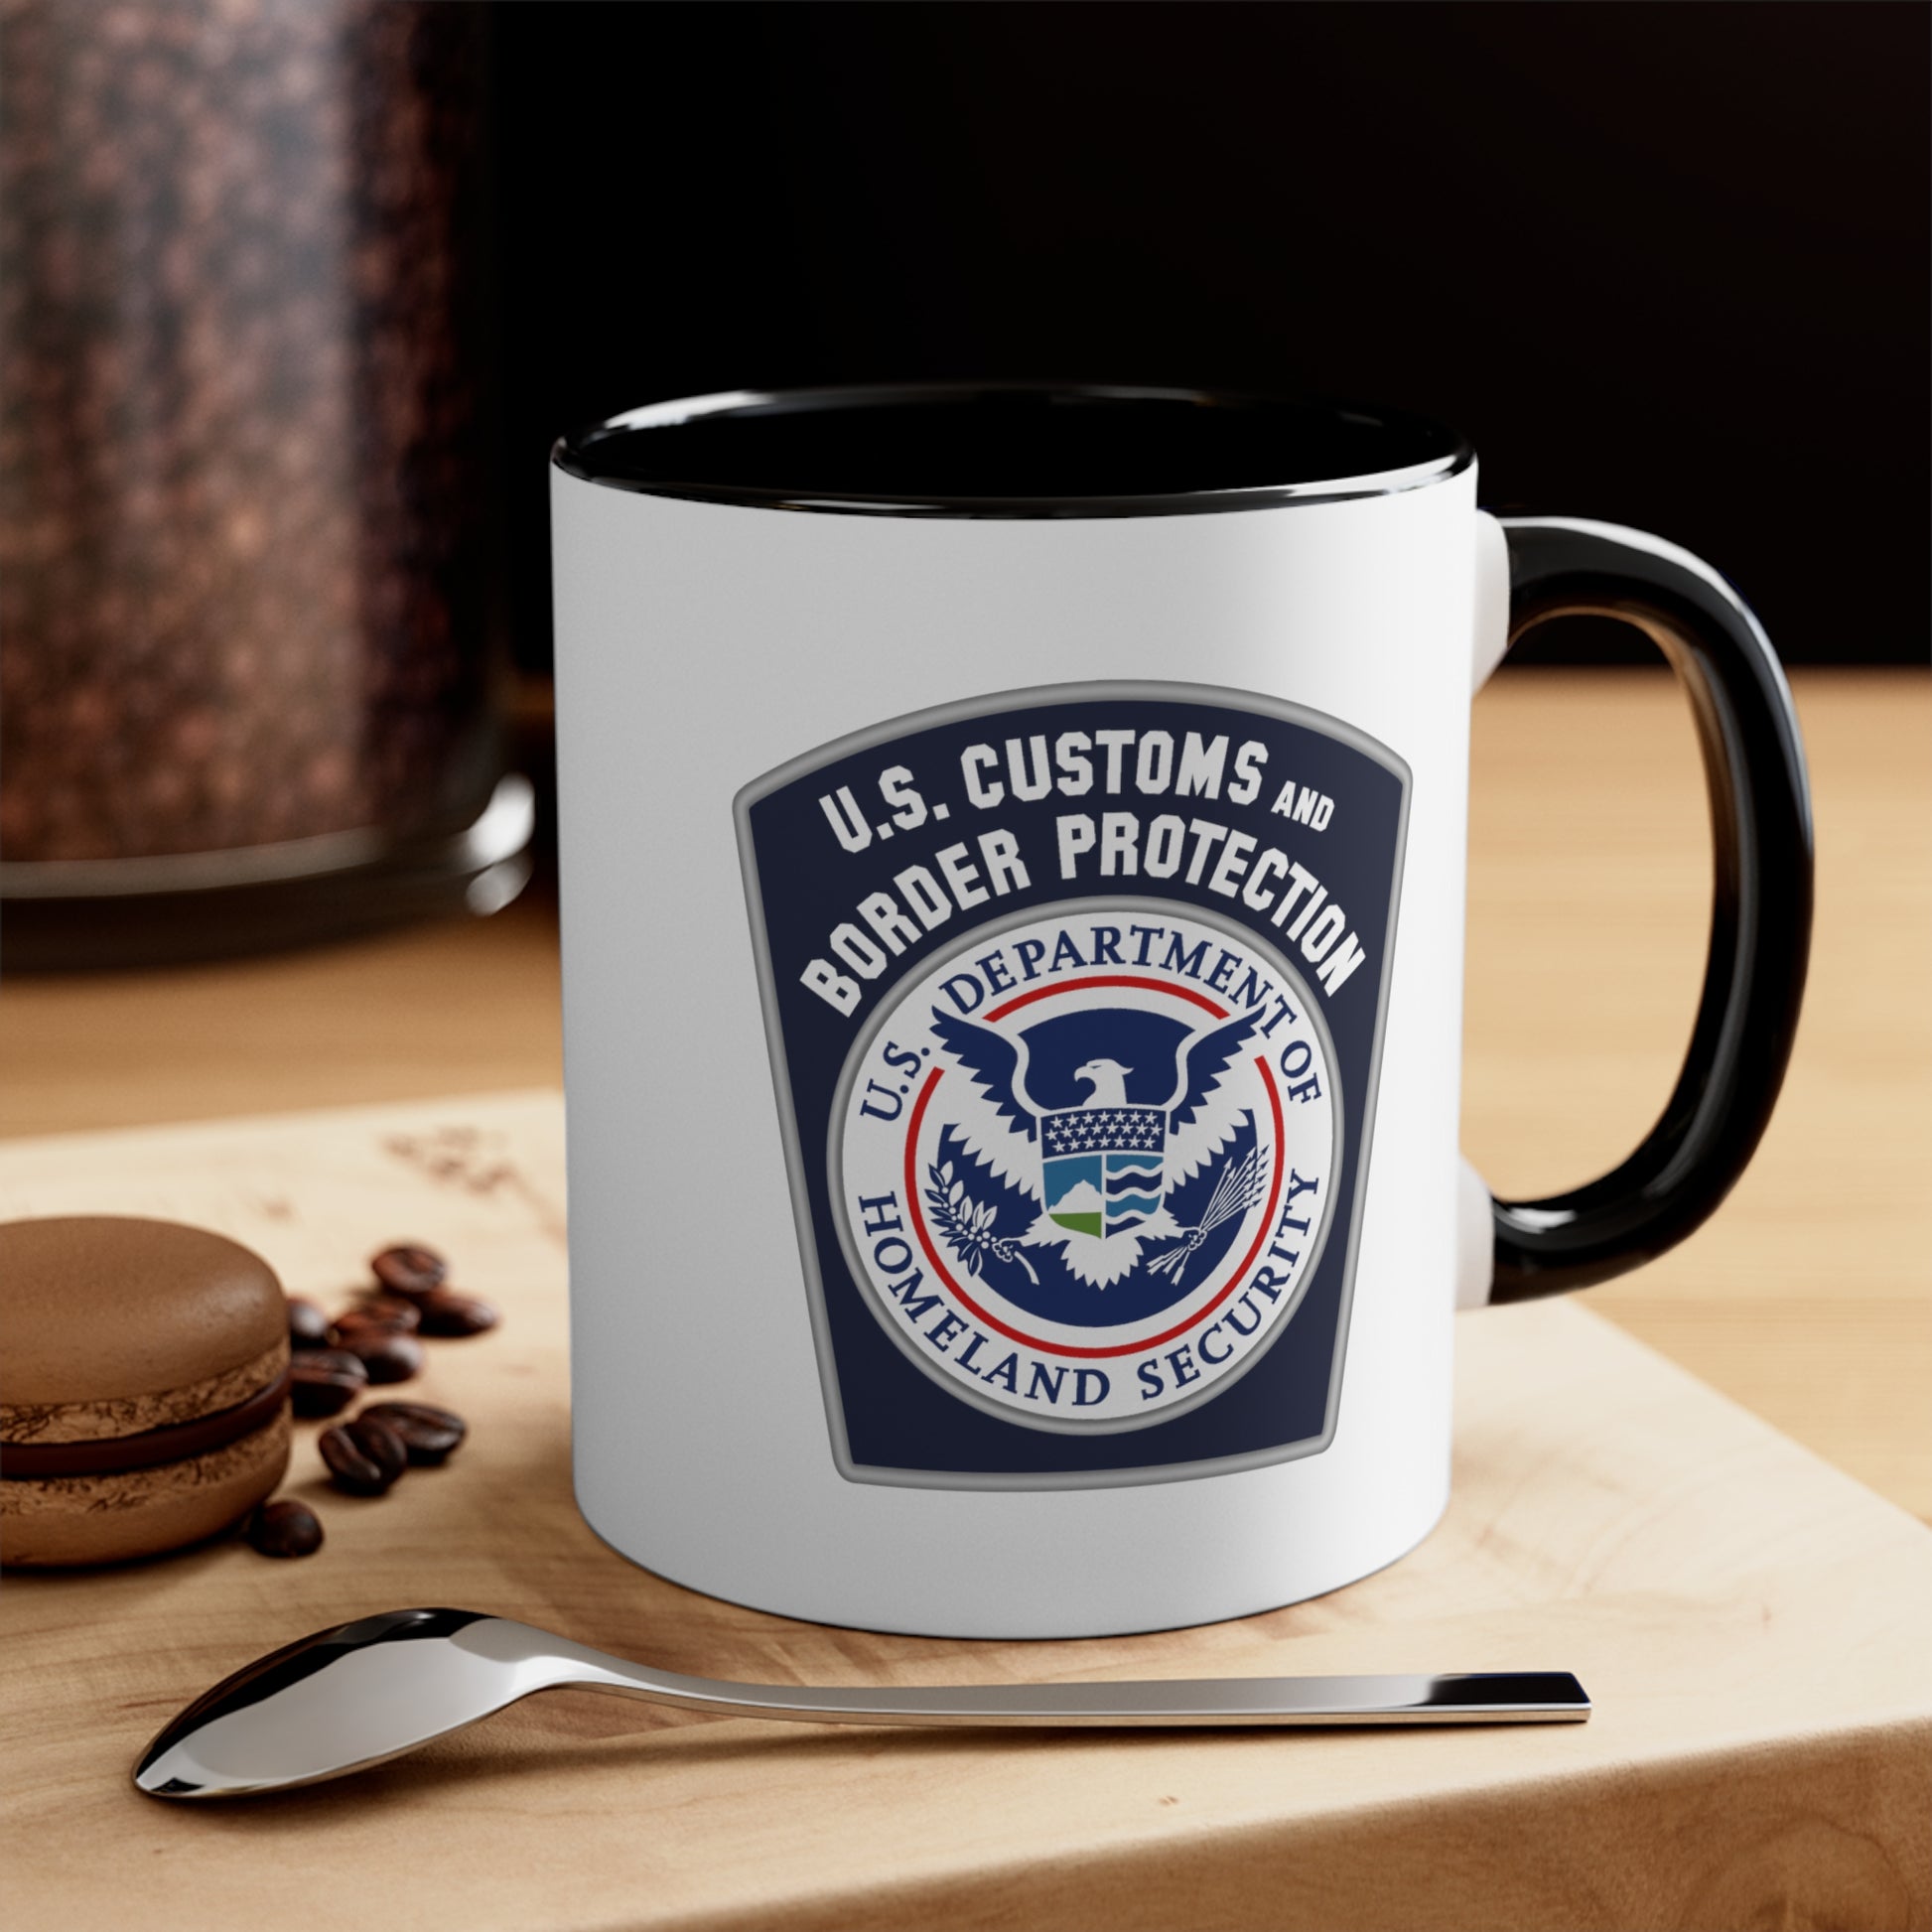 US Customs and Border Protection Coffee Mug - Double Sided Black Accent White Ceramic 11oz by TheGlassyLass